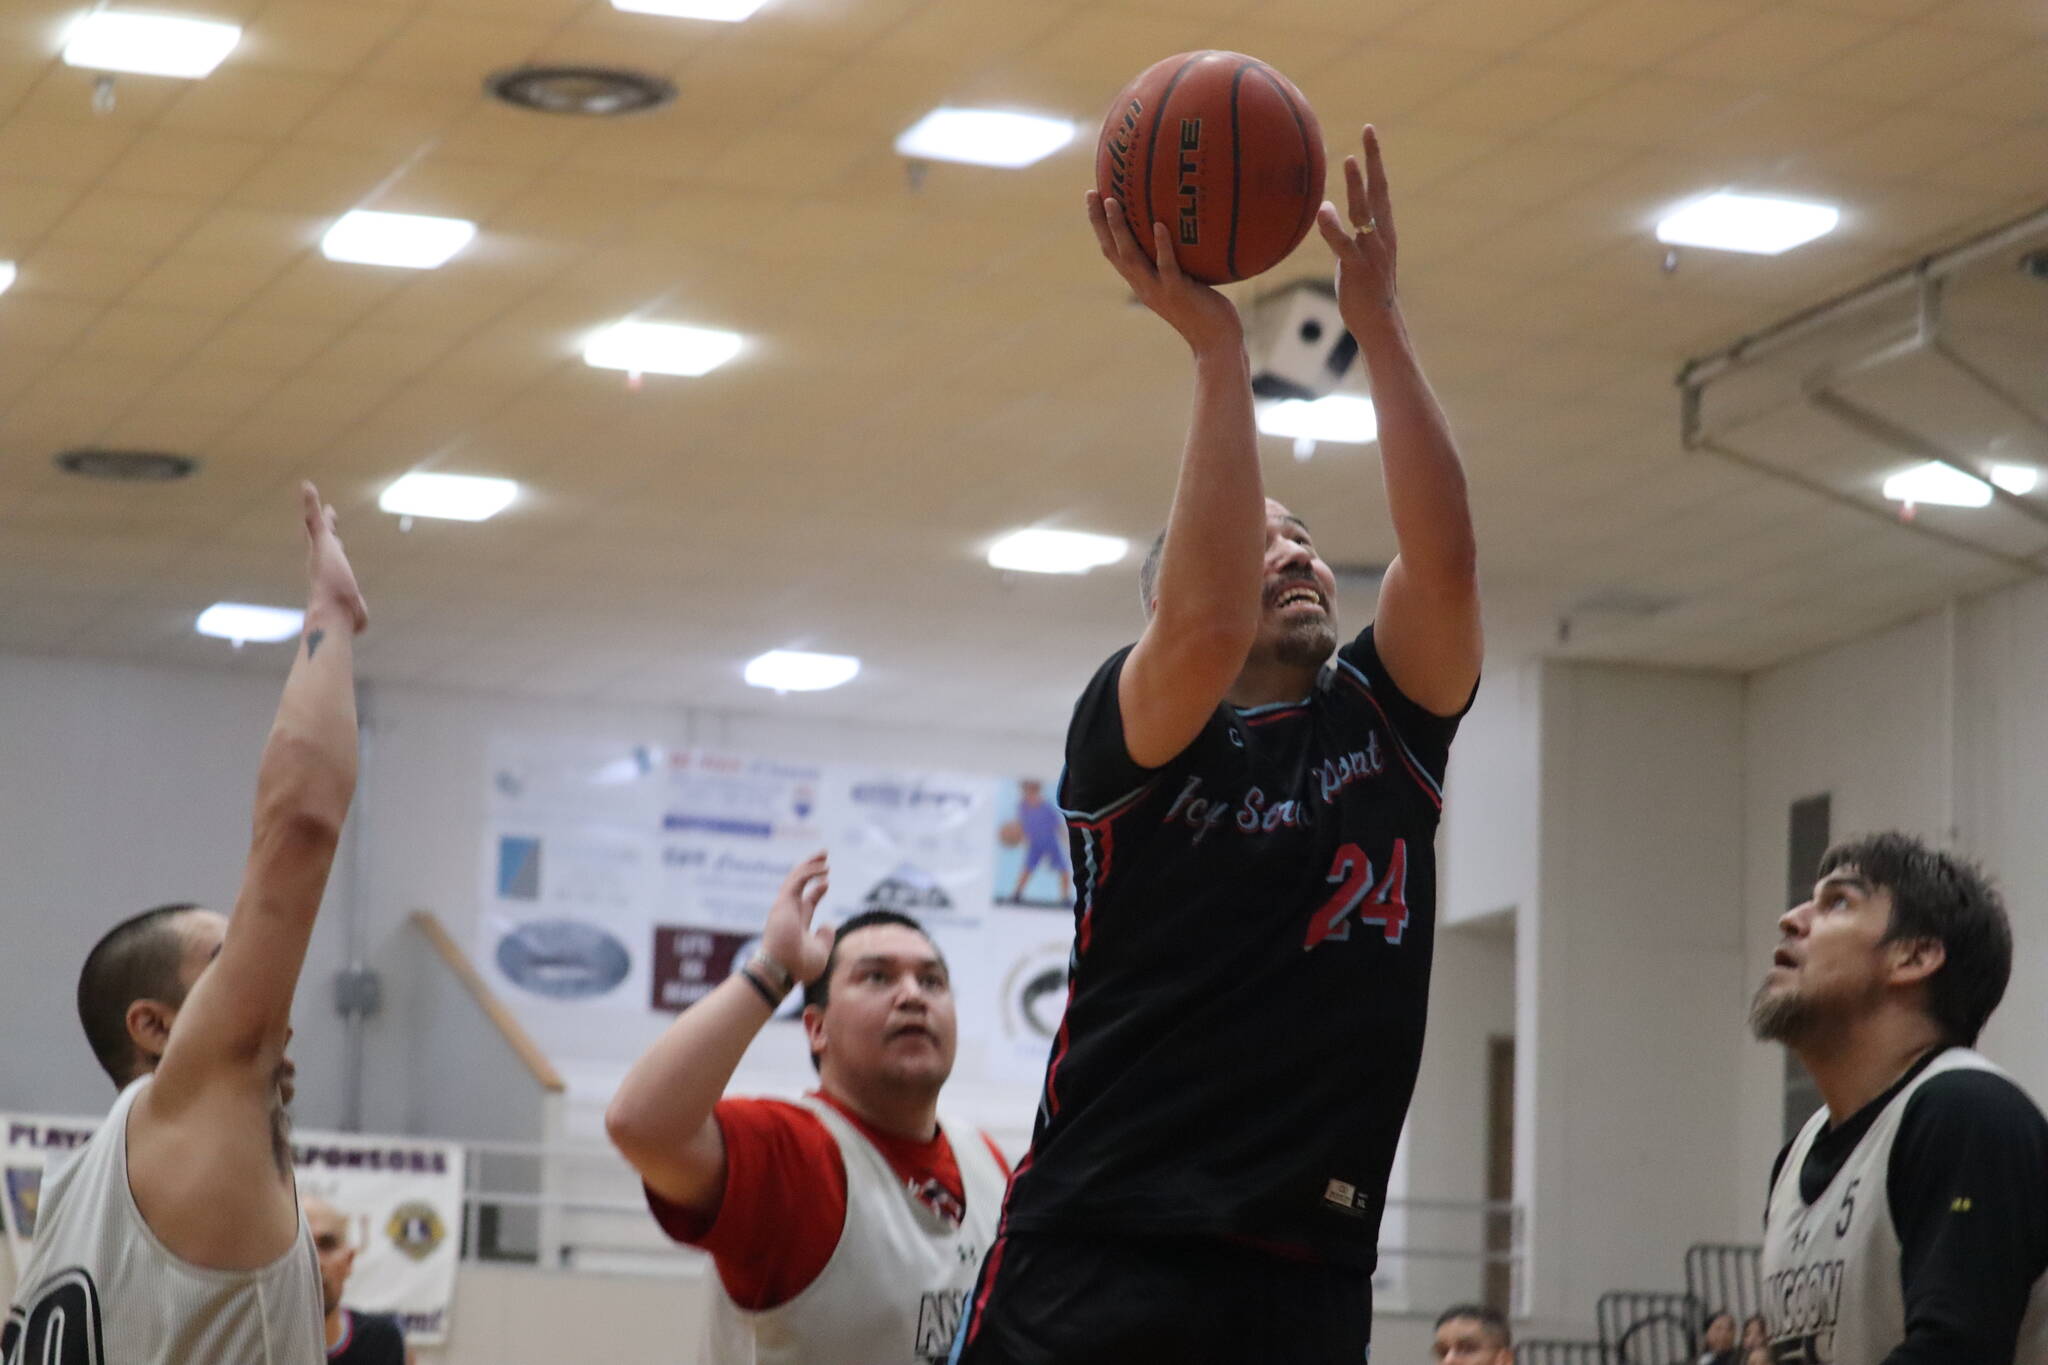 Travis Dybdahl for team Hoonah shoots a layup against Angoon Sunday night during the Gold Medal Basketball Tournament at JDHS. Dybdahl led his team in scores for a total of 32 points (Jonson Kuhn / Juneau Empire)